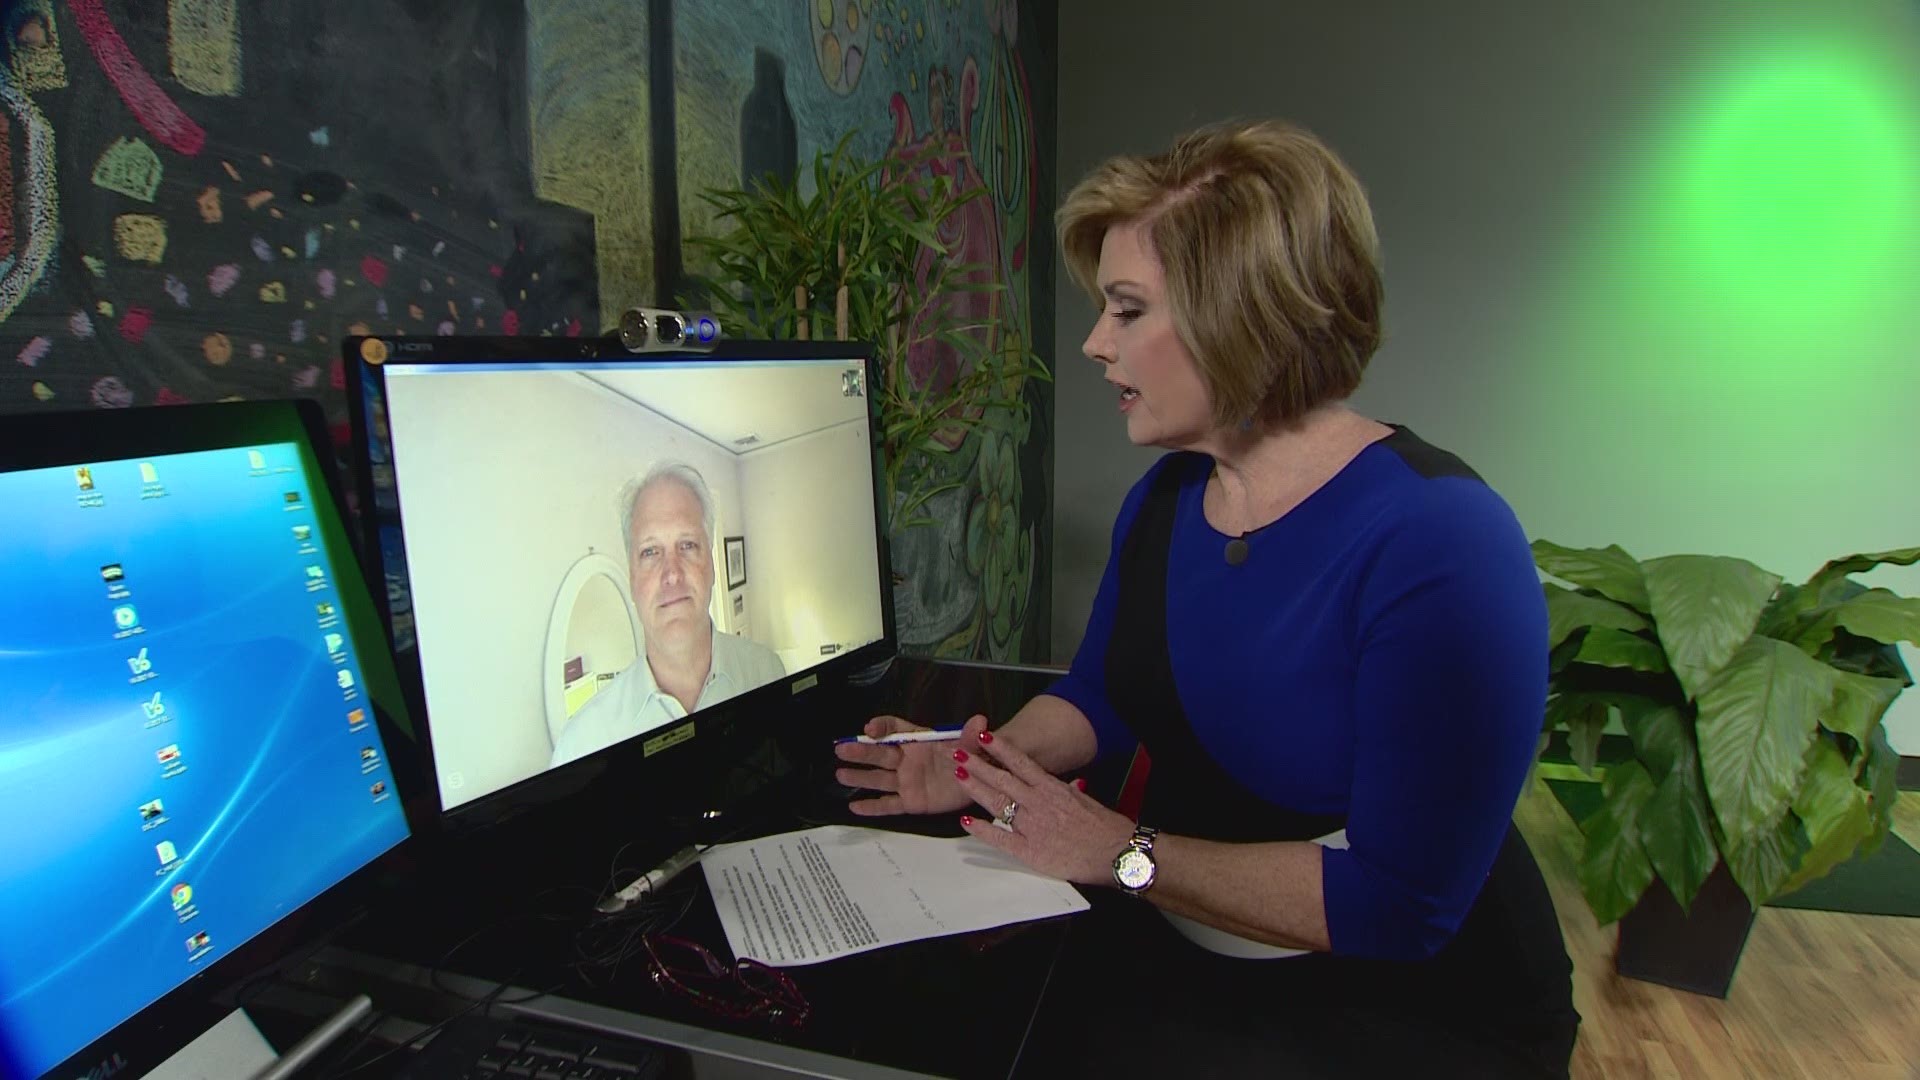 KENS 5's Deborah Knapp talks with RIP Medical Debt about how health bills can be forgiven for just pennies on the dollar.